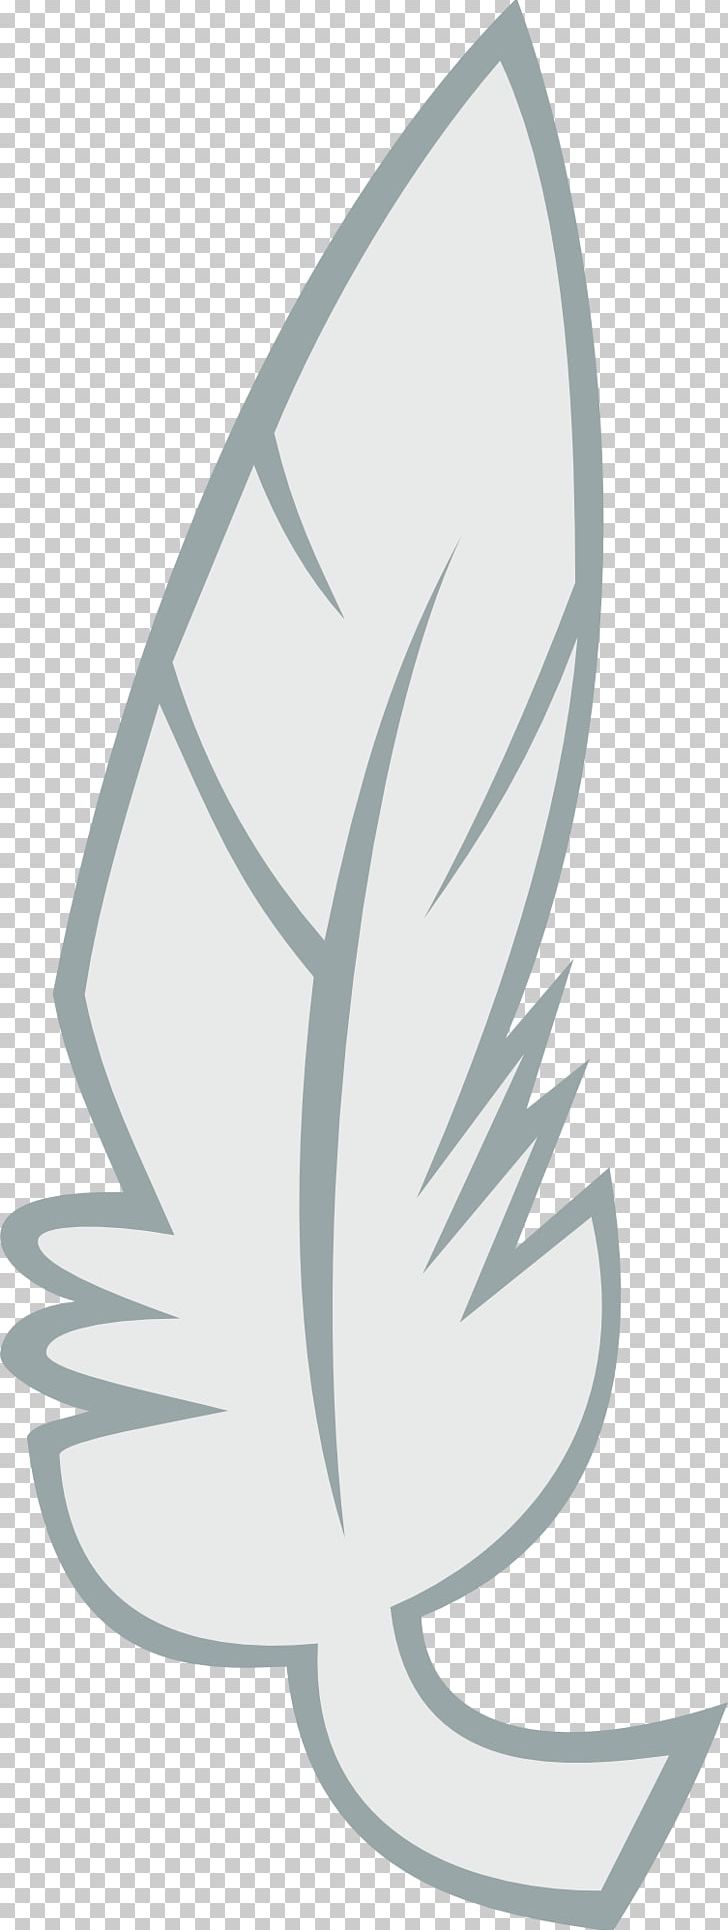 Feather Derpy Hooves Cutie Mark Crusaders Pony Call Of The Cutie PNG, Clipart, Alula, Animals, Call Of The Cutie, Cutie Mark, Cutie Mark Crusaders Free PNG Download